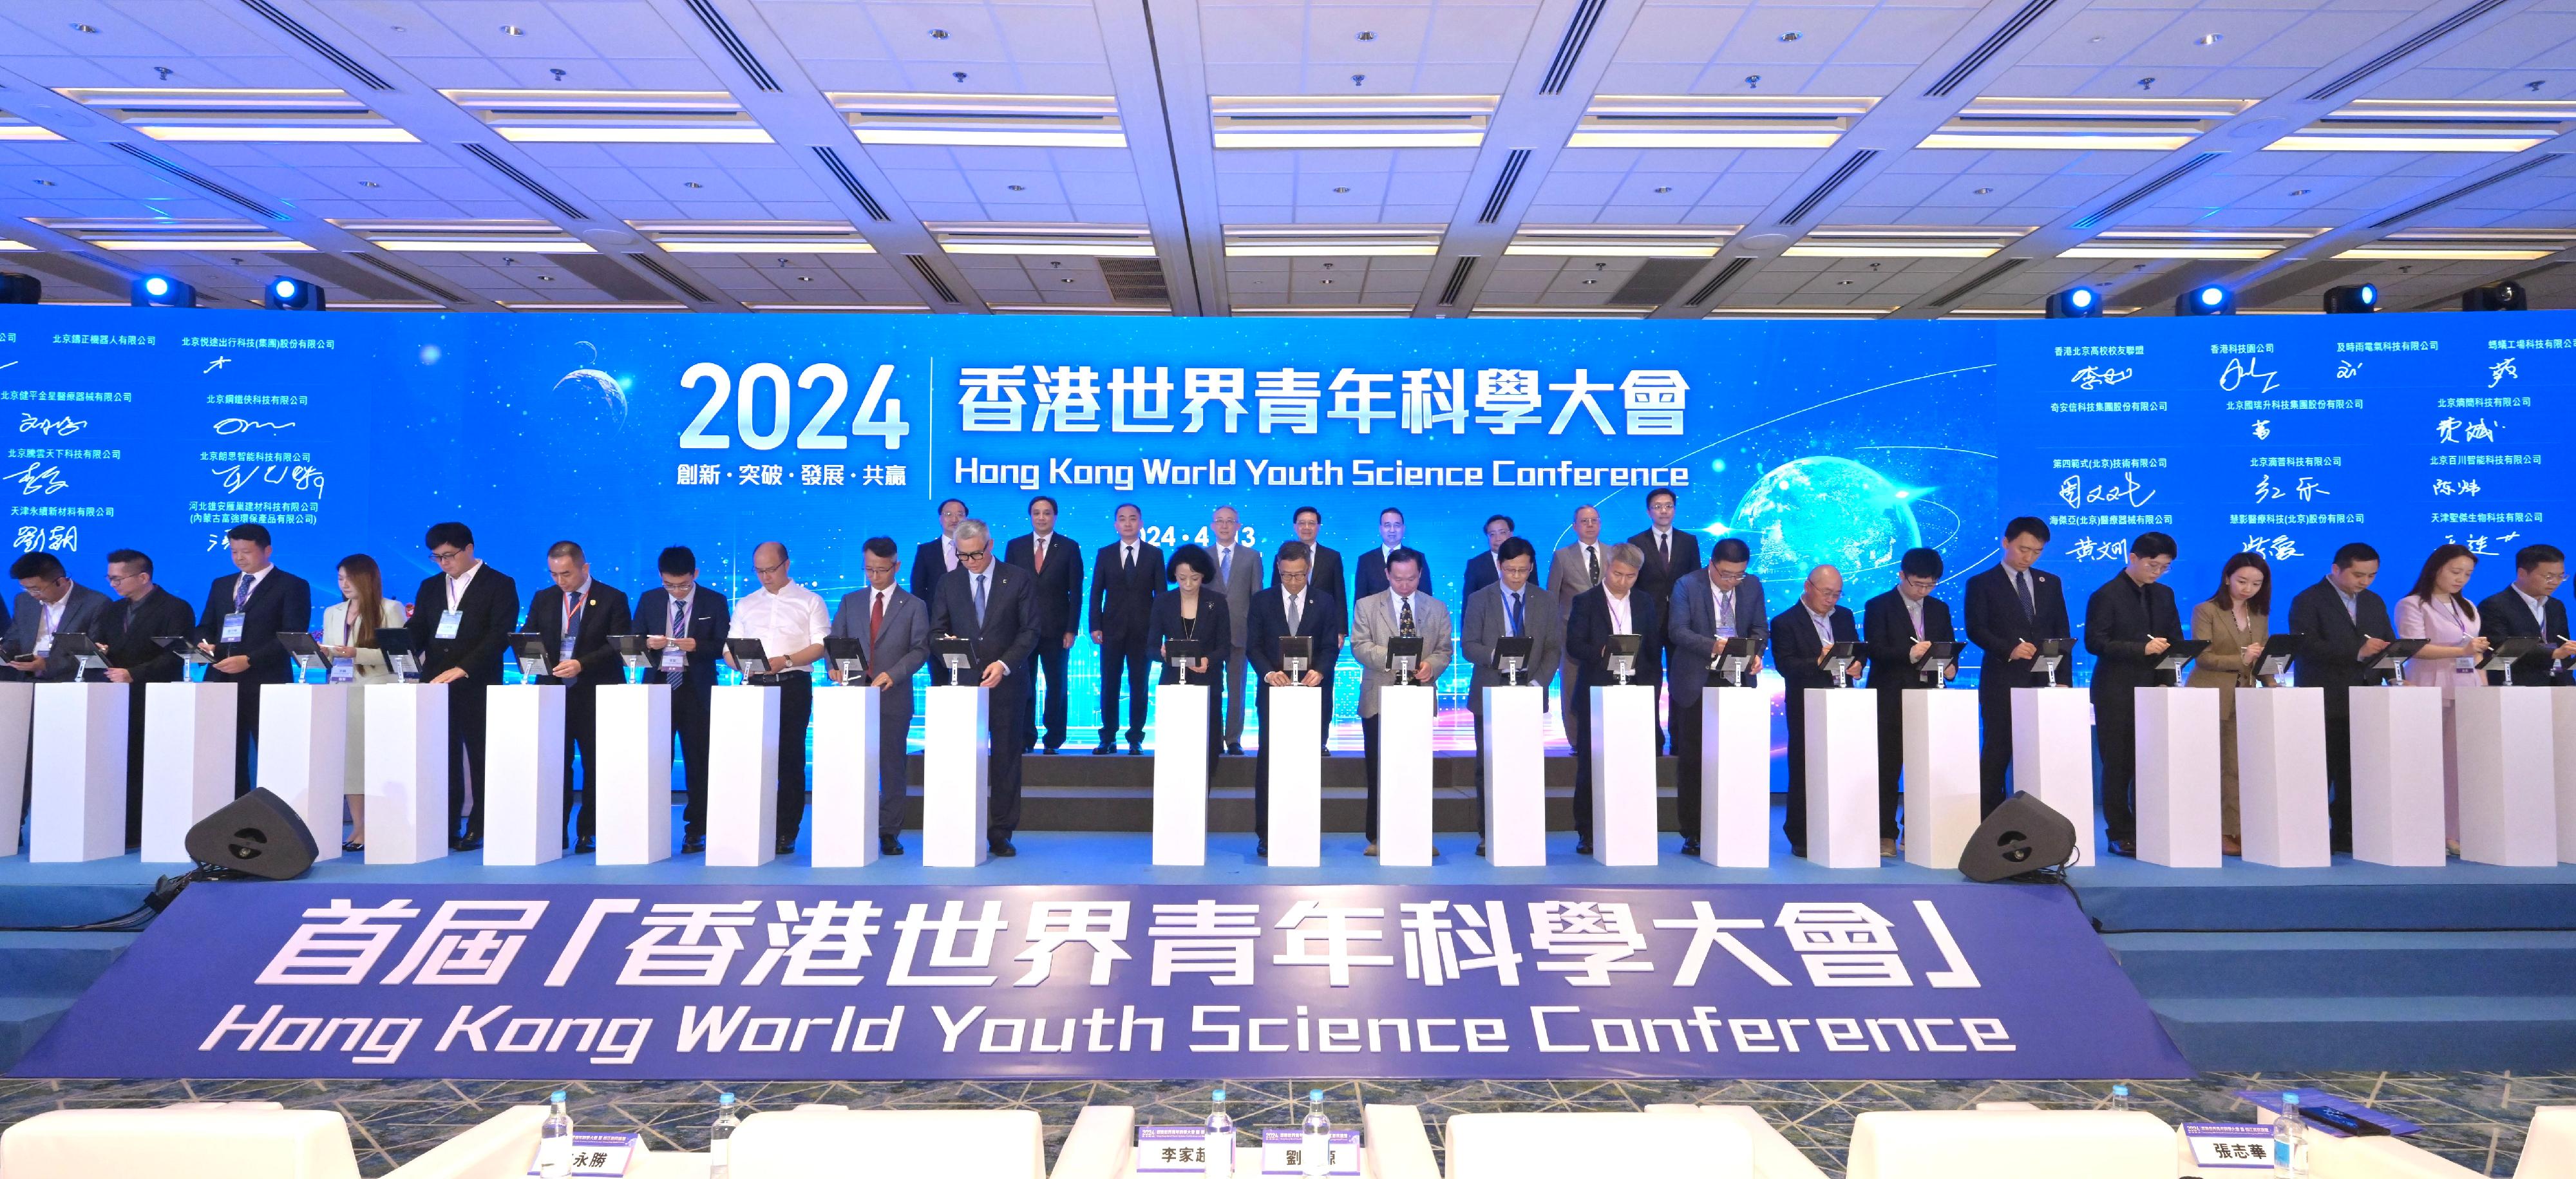 The Chief Executive, Mr John Lee, today (April 13) attended the opening ceremony of Hong Kong World Youth Science Conference and the Xiangjiang Nobel Forum 2024. Photo shows Mr Lee (back row, centre); Deputy Director of the Liaison Office of the Central People's Government in the Hong Kong Special Administrative Region (HKSAR) Mr Liu Guangyuan (back row, fourth right); Deputy Commissioner of the Office of the Commissioner of the Ministry of Foreign Affairs of the People's Republic of China in the HKSAR Mr Li Yongsheng (back row, fourth left); and other guests, witnessing the Memoranda of Understanding signing ceremony that signifies the intention of I&T (innovation and technology) enterprises from the Beijing-Tianjin-Hebei and Xiongan area to develop in Hong Kong.